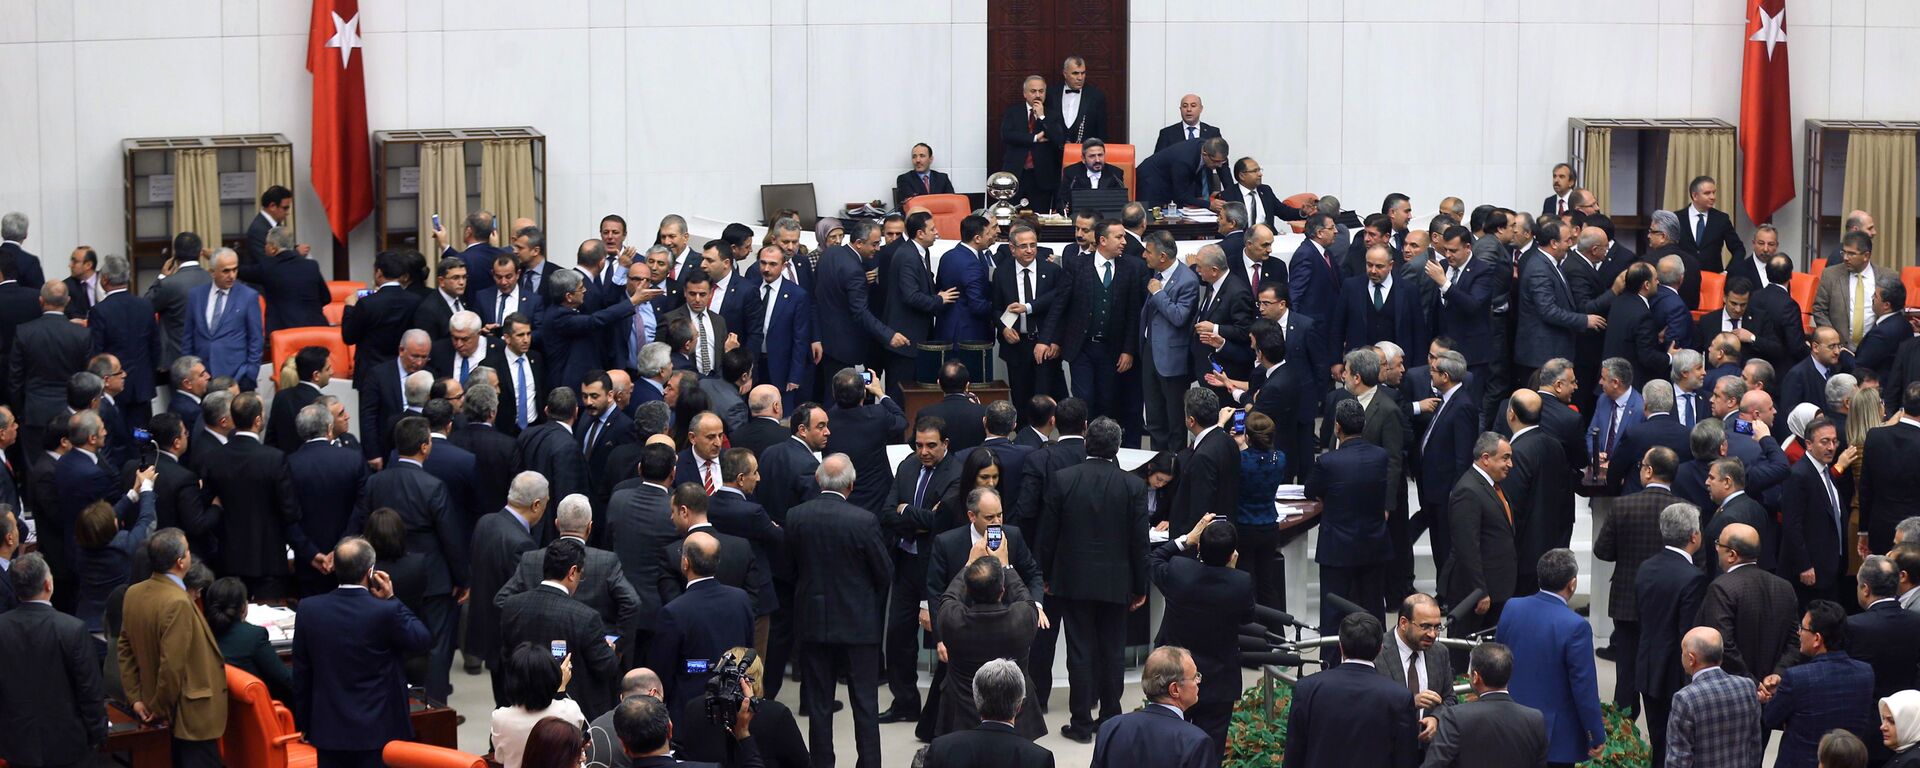 Turkish lawmakers cast their votes during a debate for a proposal for change in the constitution on January 10, 2017 at the Turkish parliament in Ankara. Turkey's parliament on January 9, 2017 began debating a controversial new draft constitution aimed at expanding the powers of the presidency under Recep Tayyip Erdogan - Sputnik International, 1920, 06.04.2023